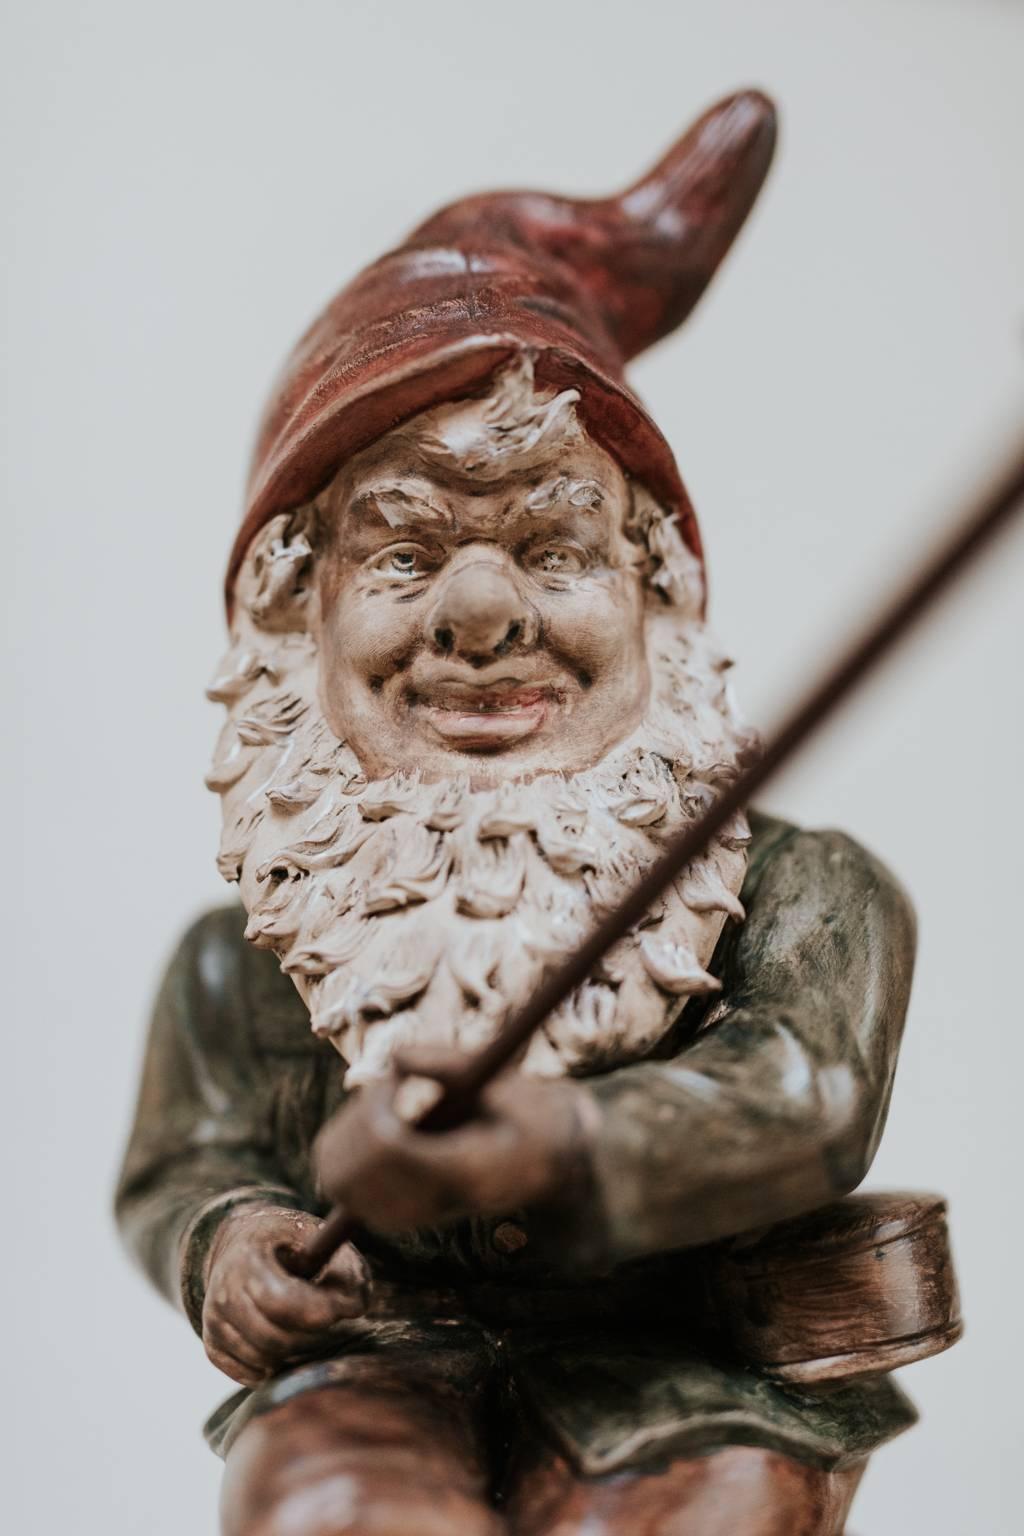 These two chaps were made in the 19th century in Austria, two fishermen, wonderful pieces for a gnome collection
Measures: one is 39 cm high x 15 cm wide x 19 cm deep
one is 38 cm high x 18 cm wide x 15 cm deep.